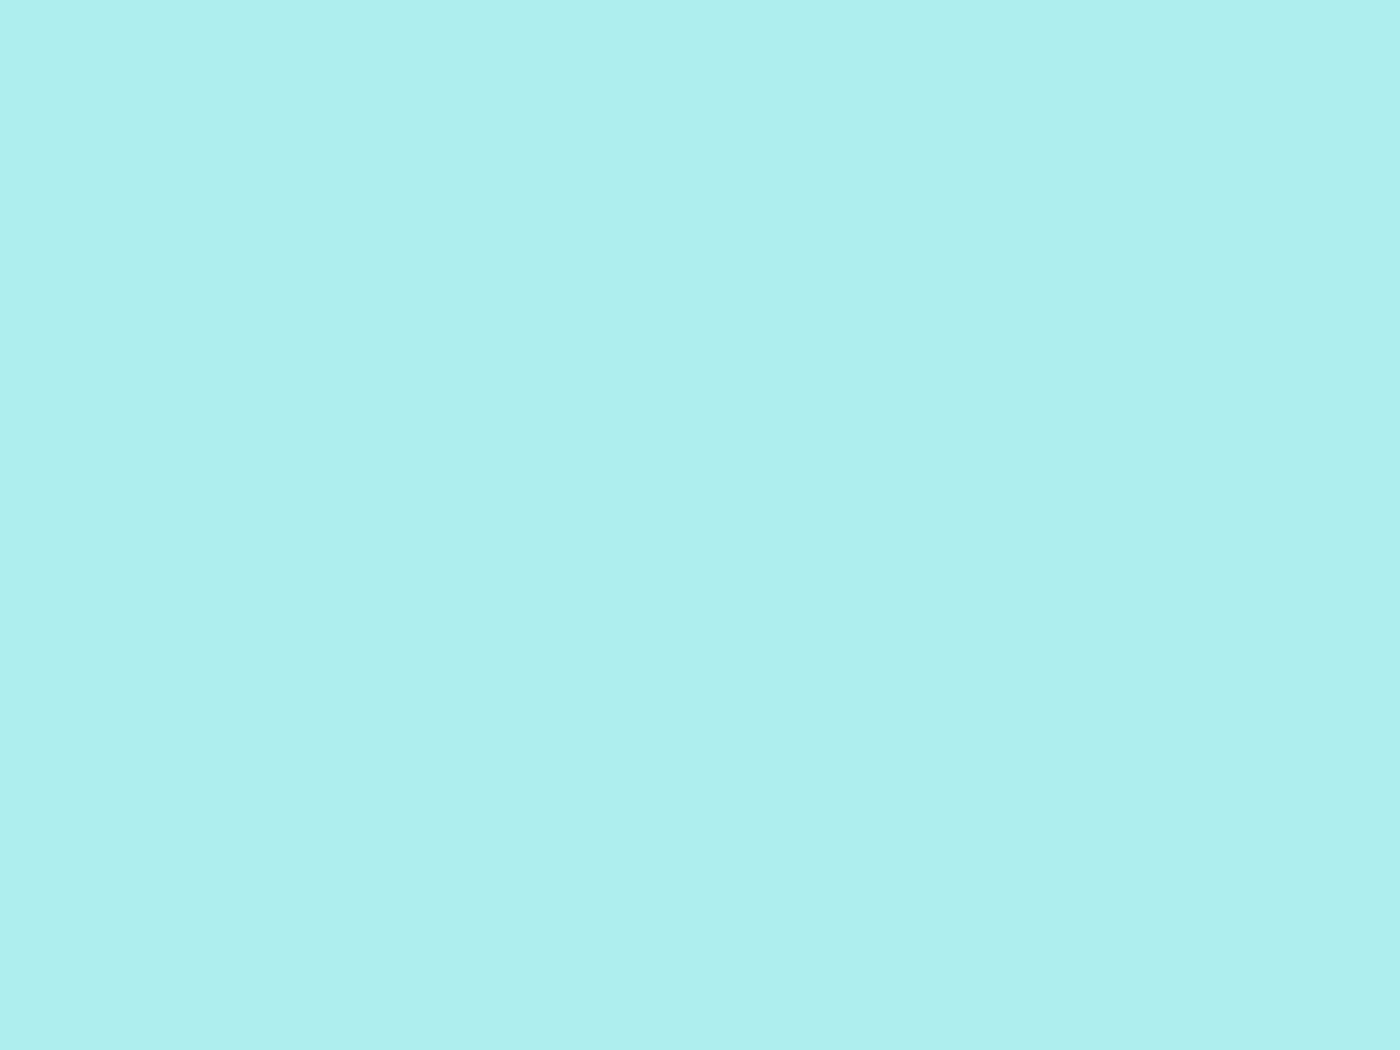 Solid Turquoise Background Pale